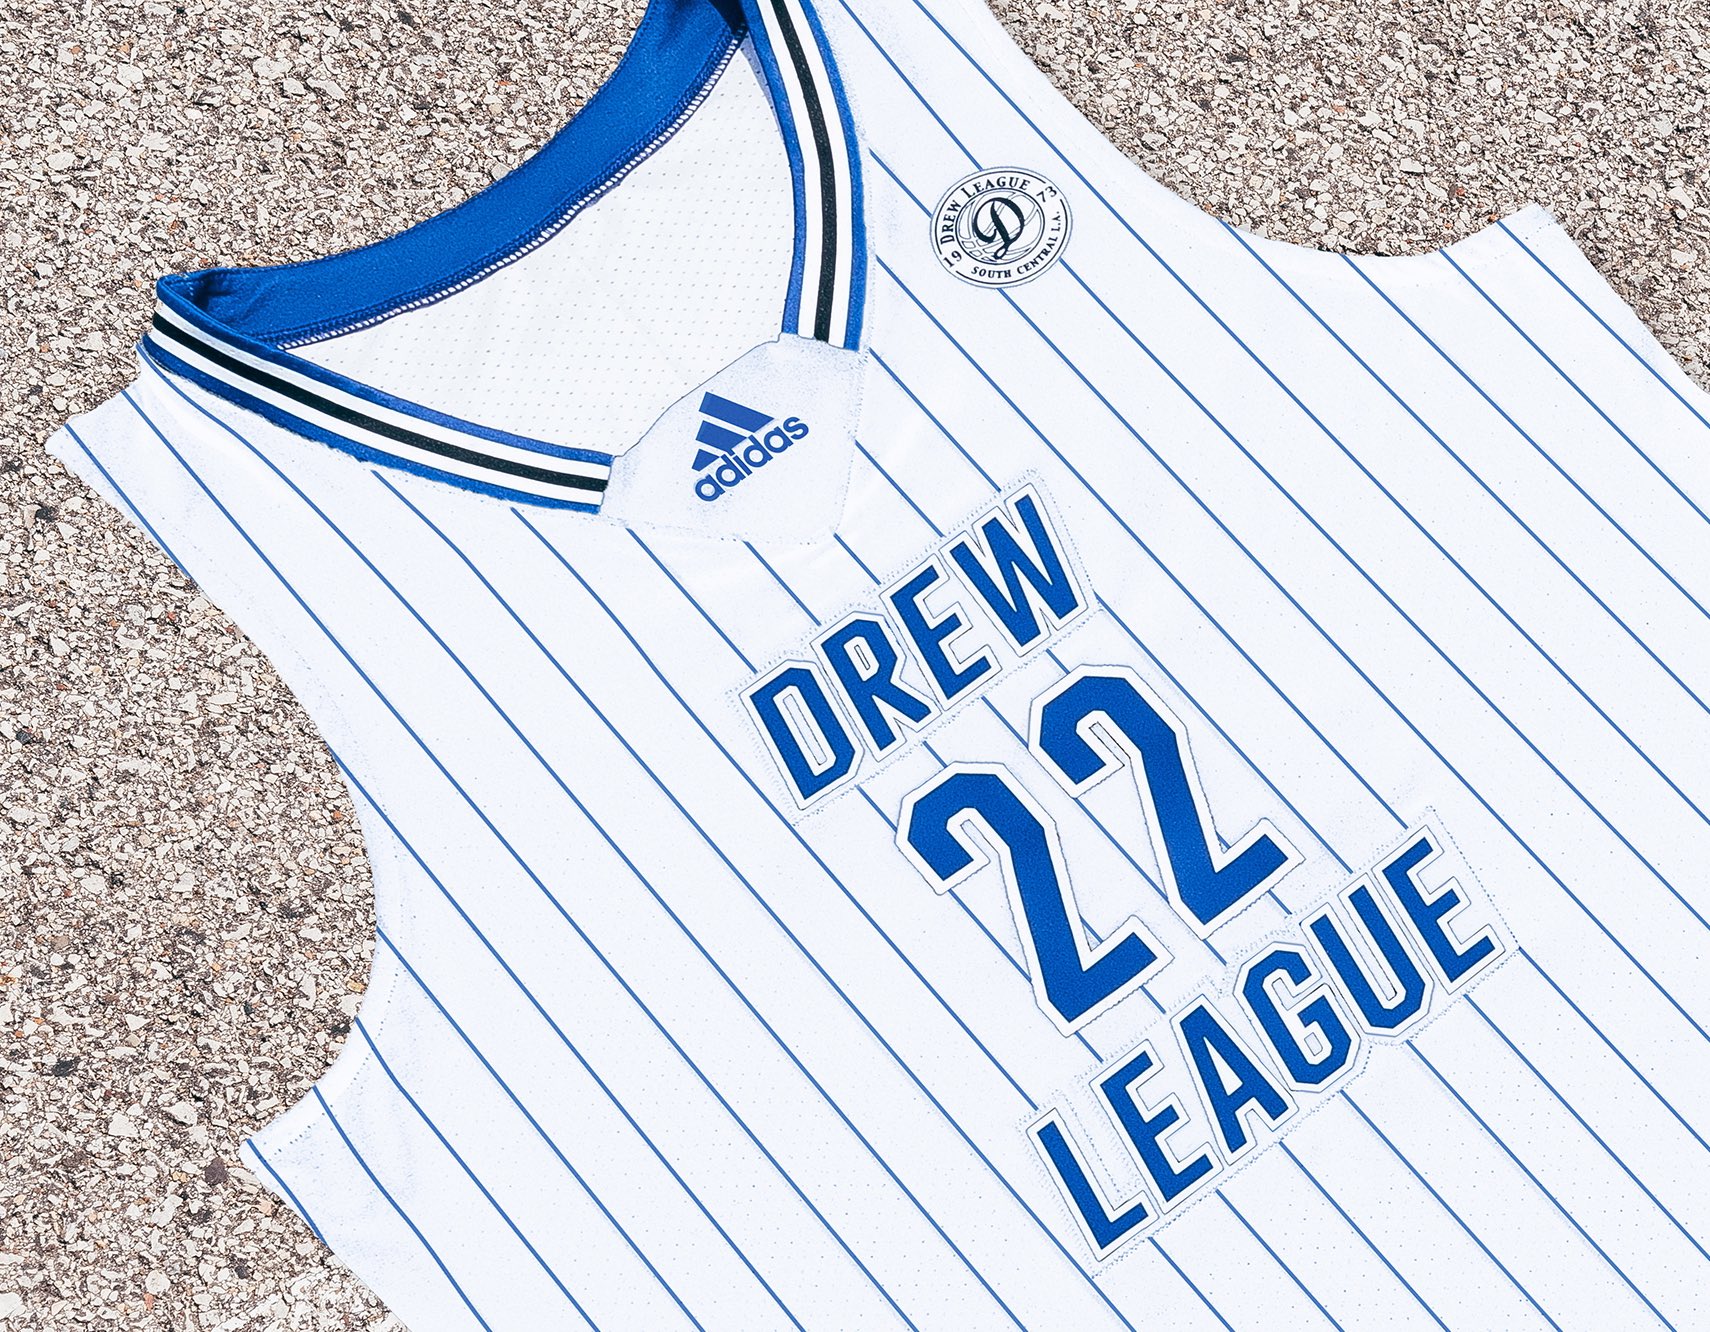 Nick DePaula on Twitter "FIRST LOOK The DrewLeague’s uniforms for